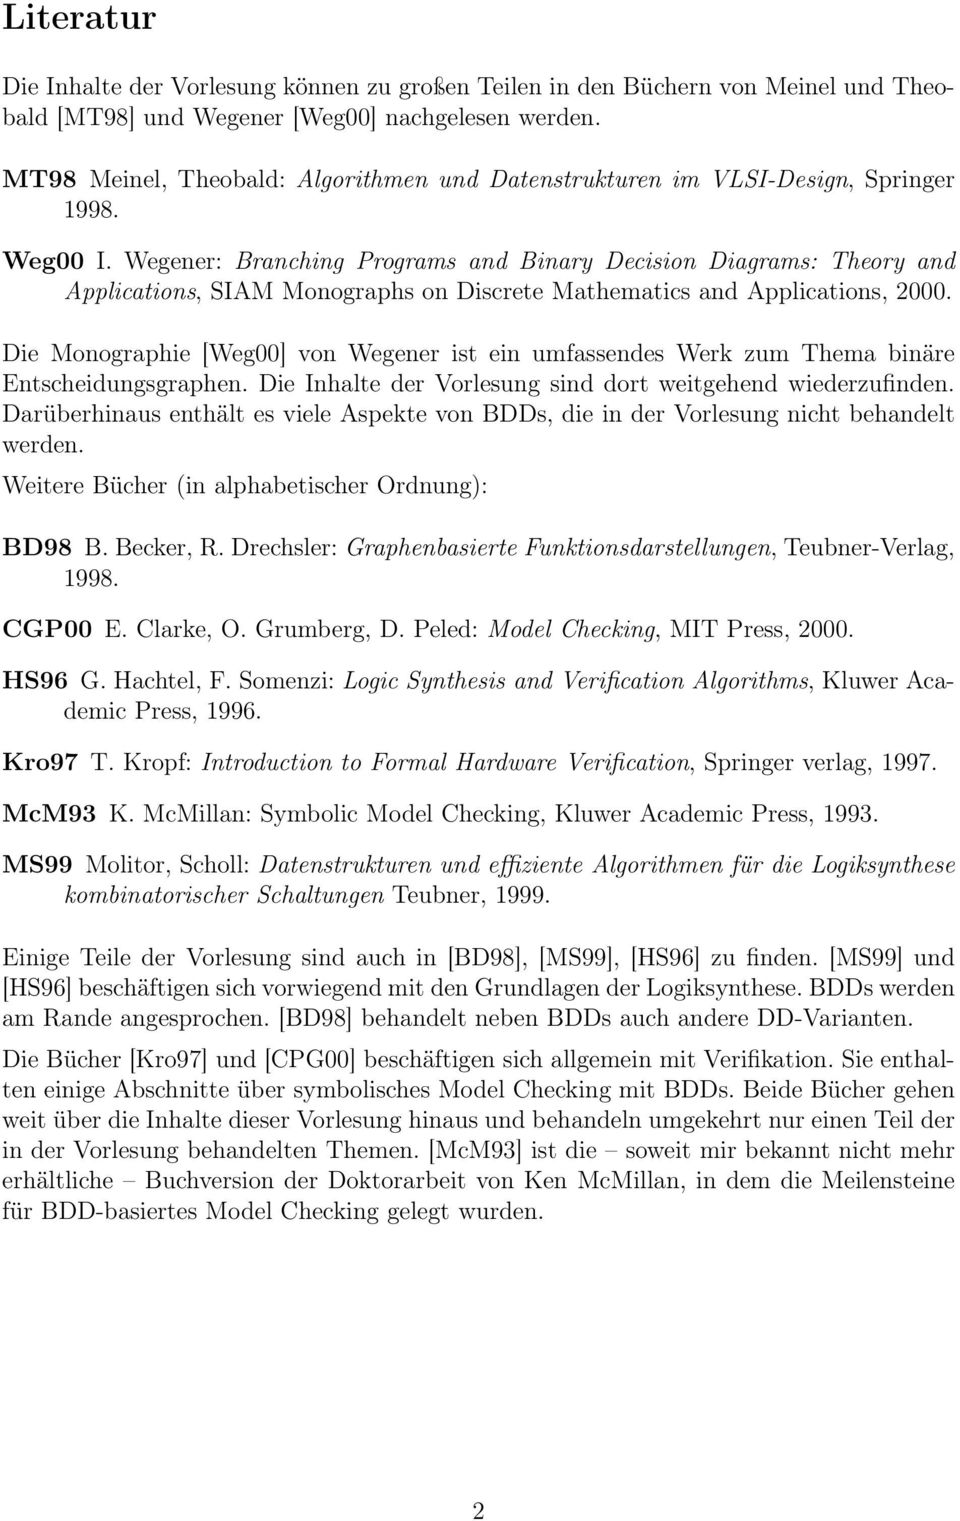 Wegener: Branching Programs and Binary Decision Diagrams: Theory and Applications, SIAM Monographs on Discrete Mathematics and Applications, 2000.